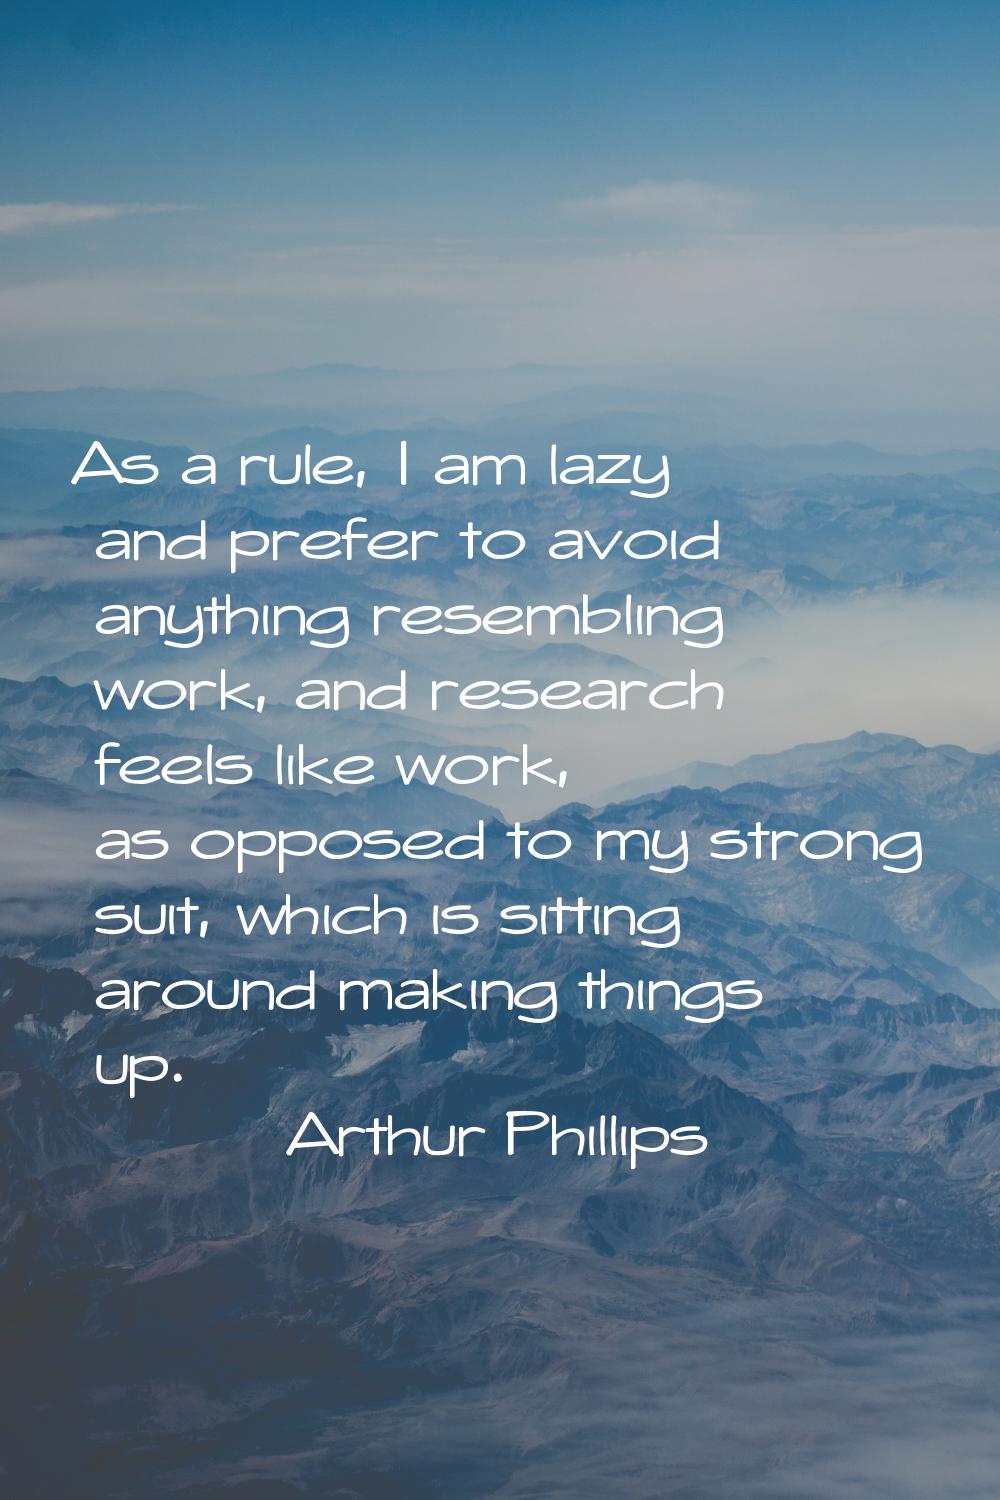 As a rule, I am lazy and prefer to avoid anything resembling work, and research feels like work, as